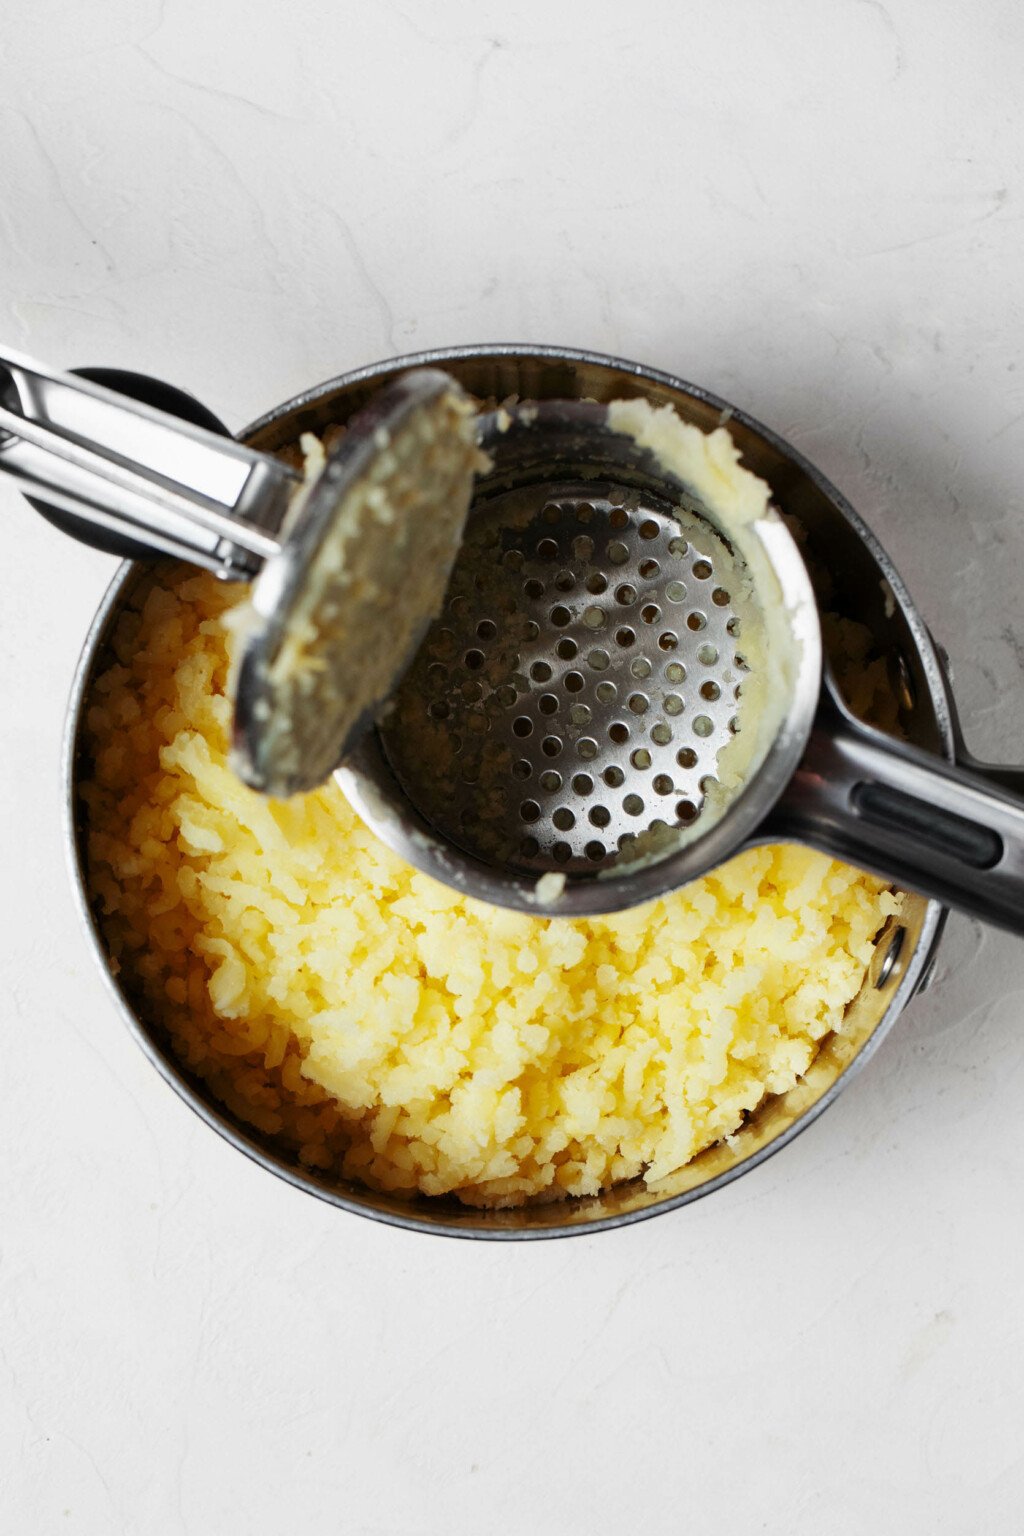 An overhead image of a potato ricer, which is being used to rice pale gold potatoes.